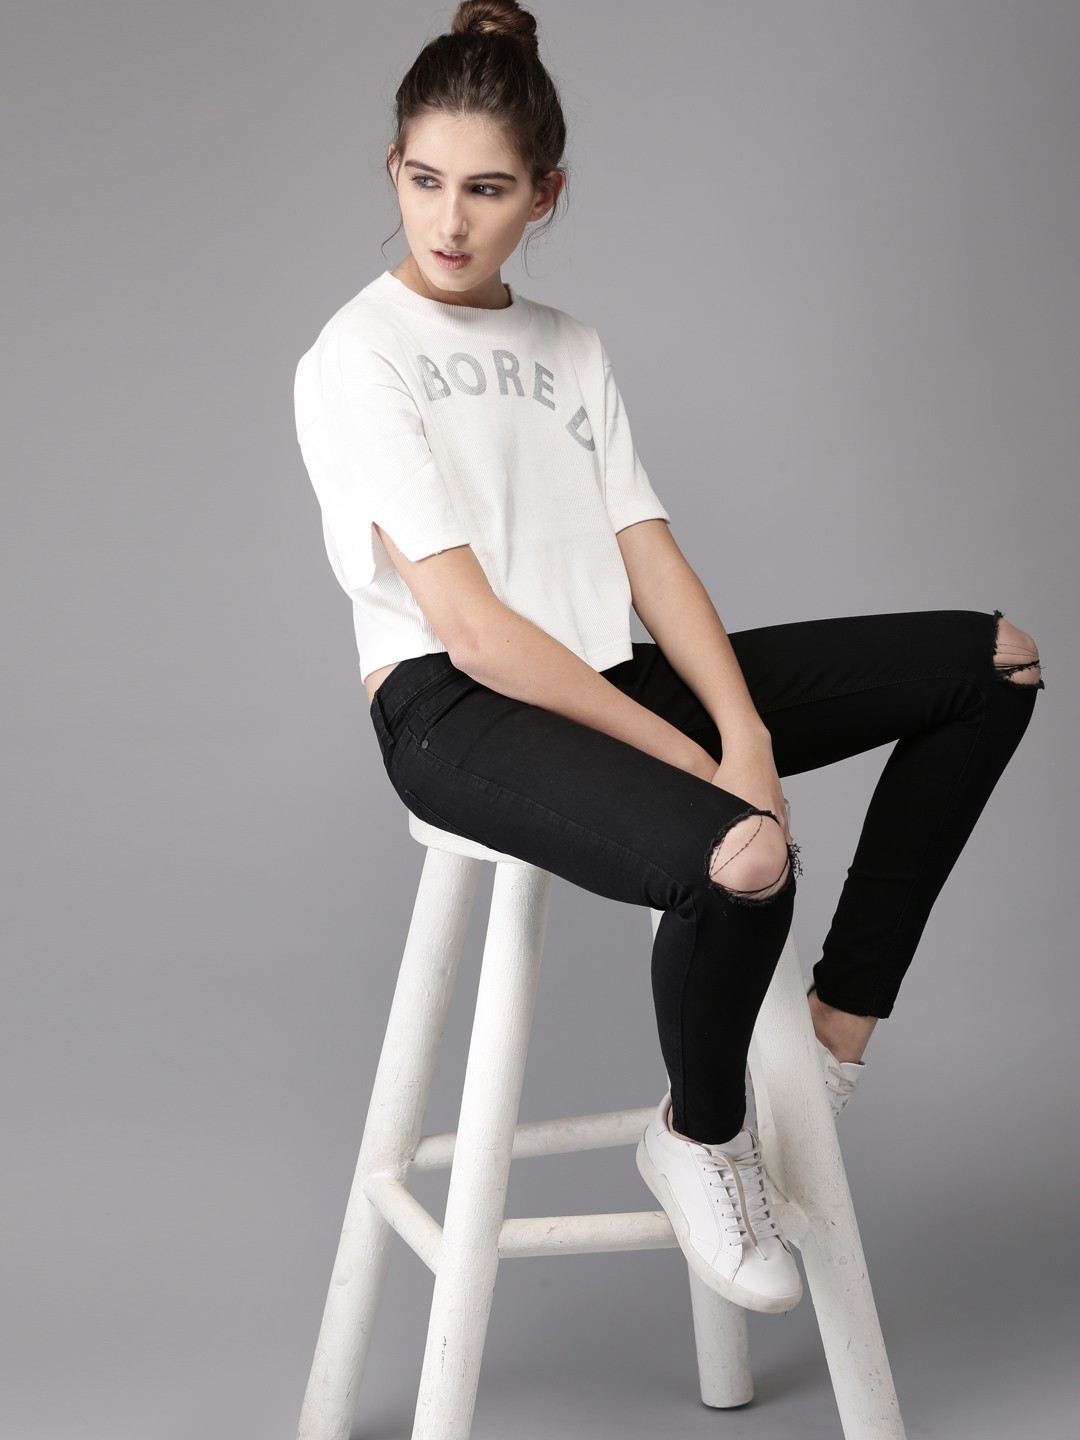 Black dark wash 5-pocket mid-rise ripped jeans: Black Ripped Jeans Outfits  